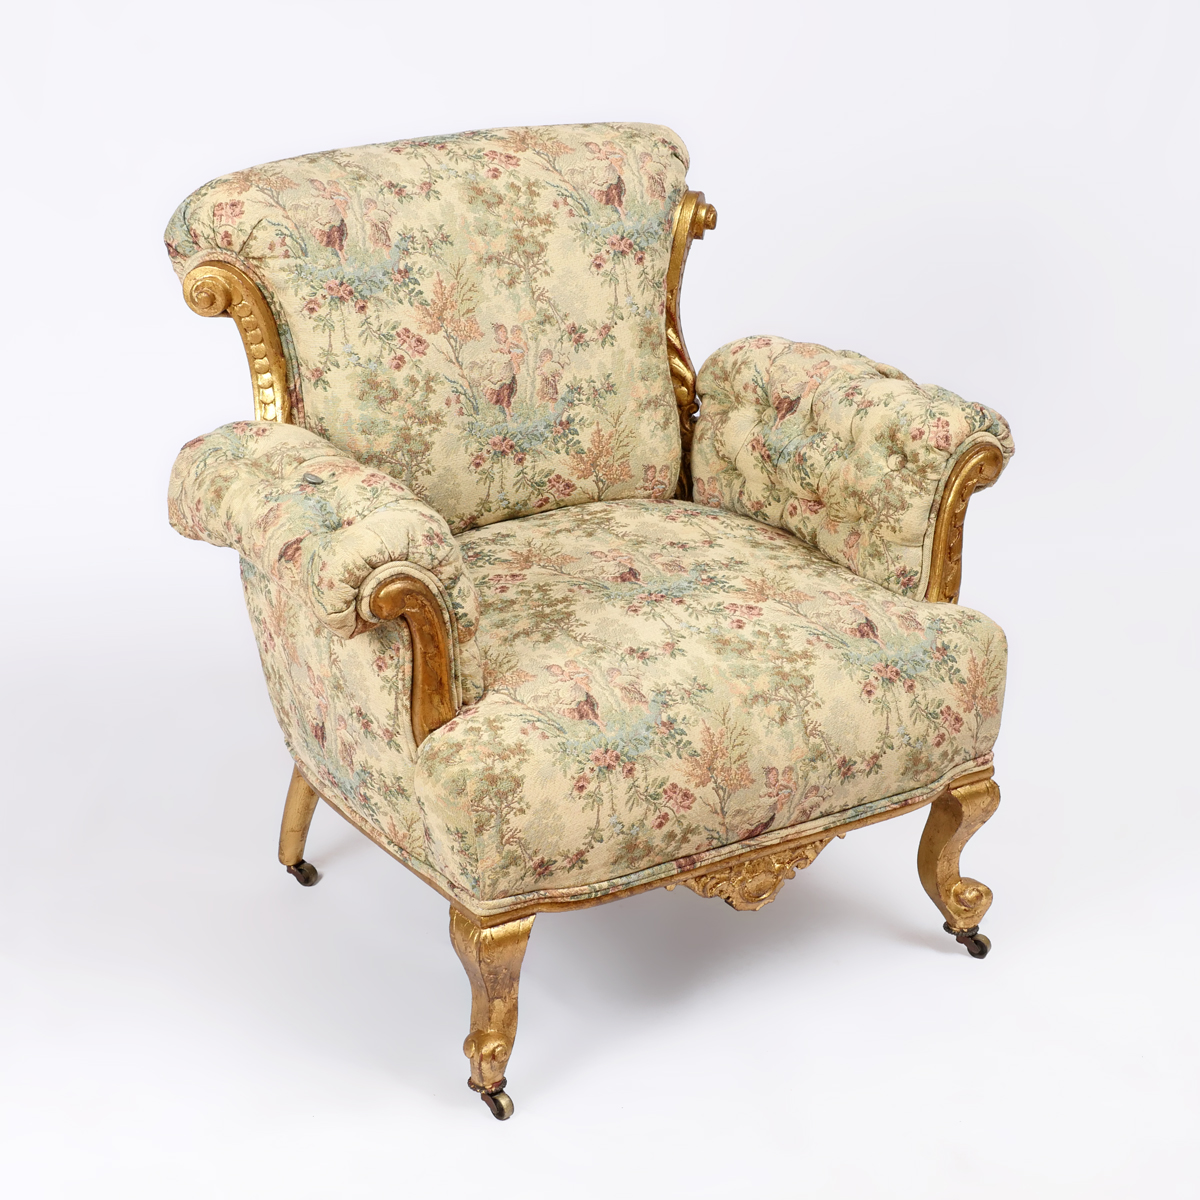 CARVED GILT ARMCHAIR: French style